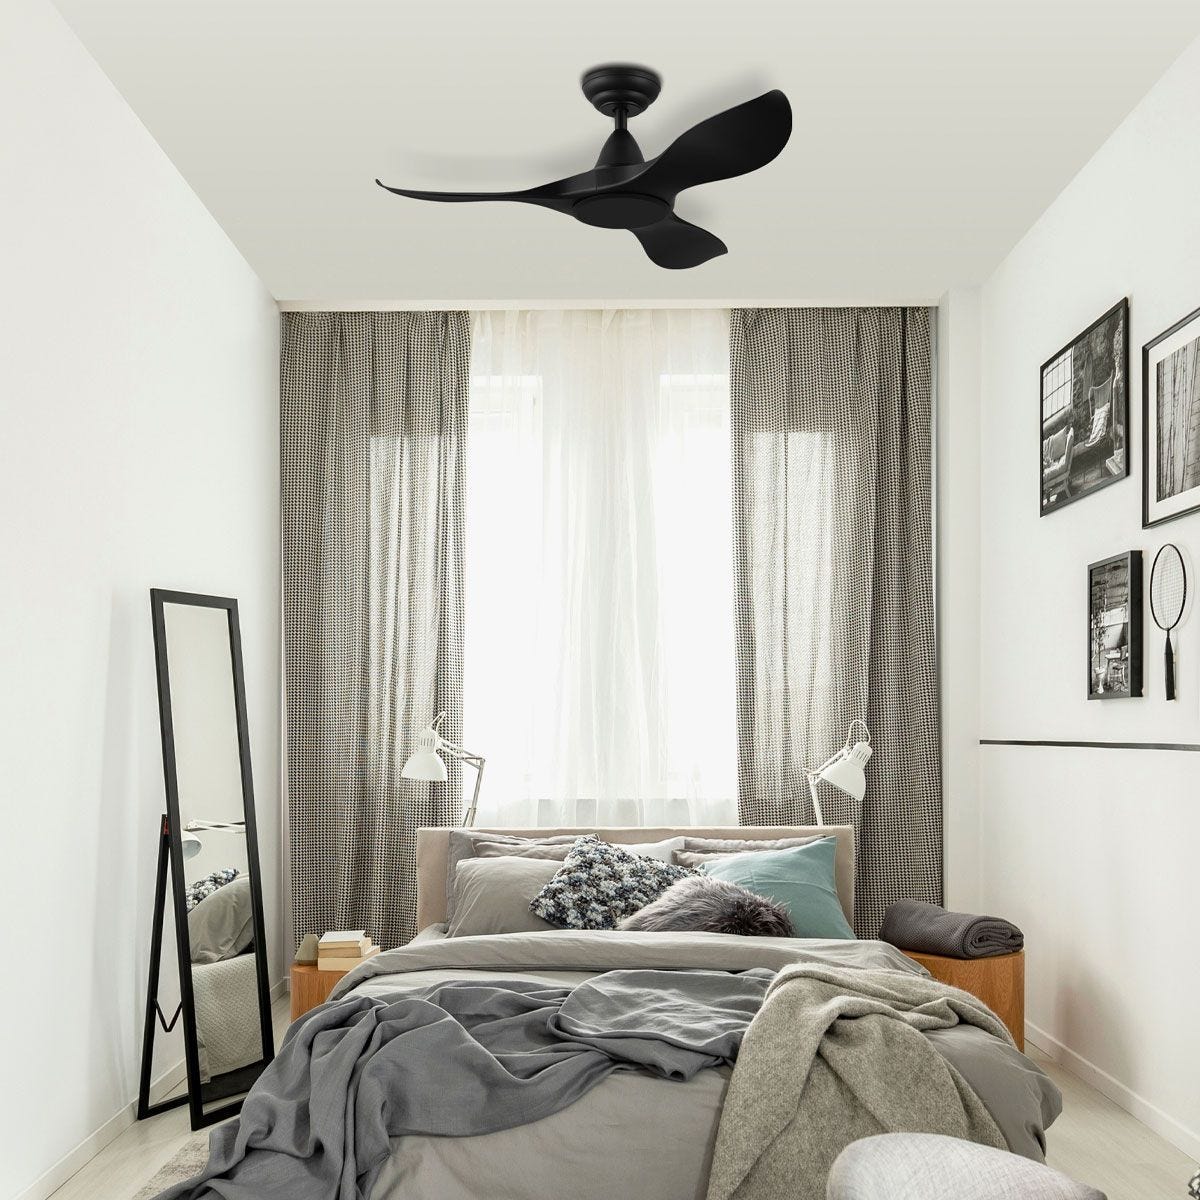 Eglo NOOSA 40” ABS 3 Blade DC Ceiling Fan with Remote Control - Mases LightingEglo